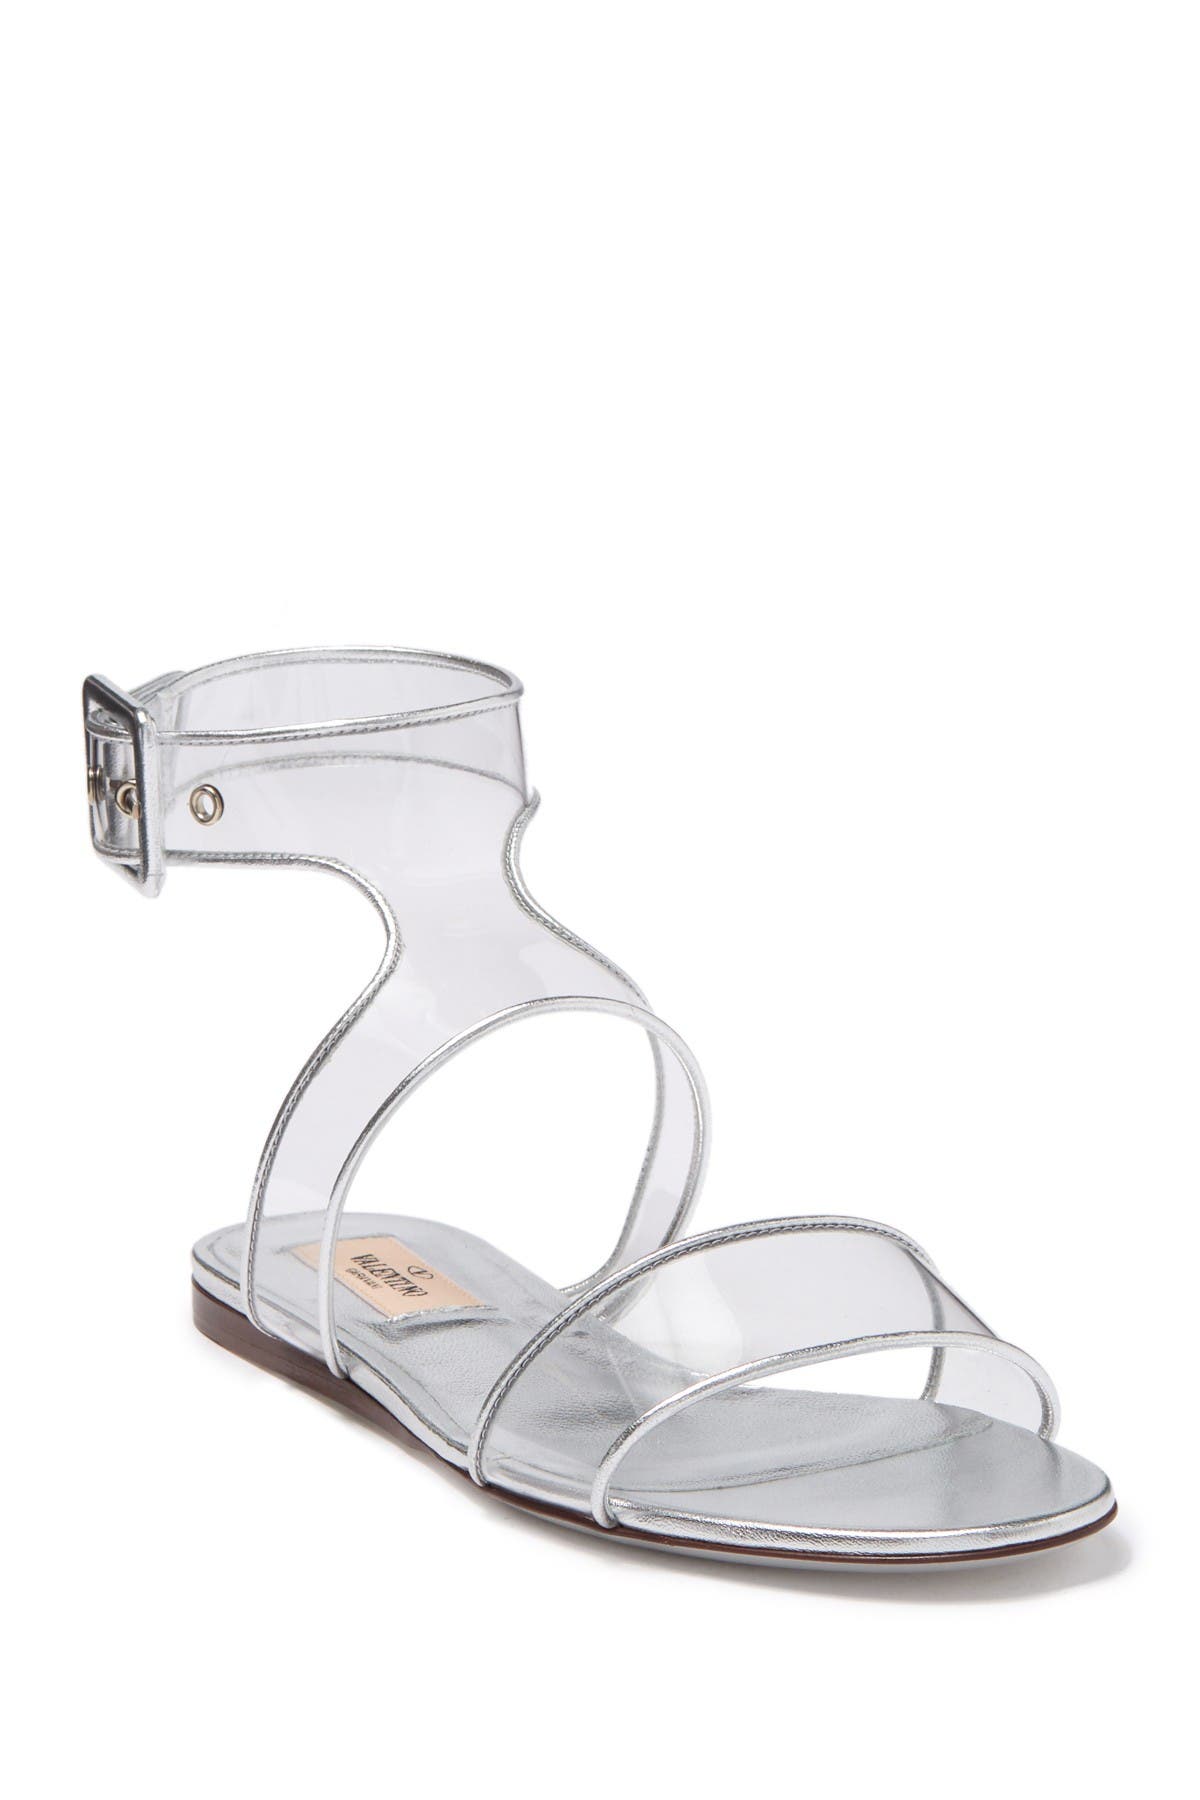 clear valentino sandals